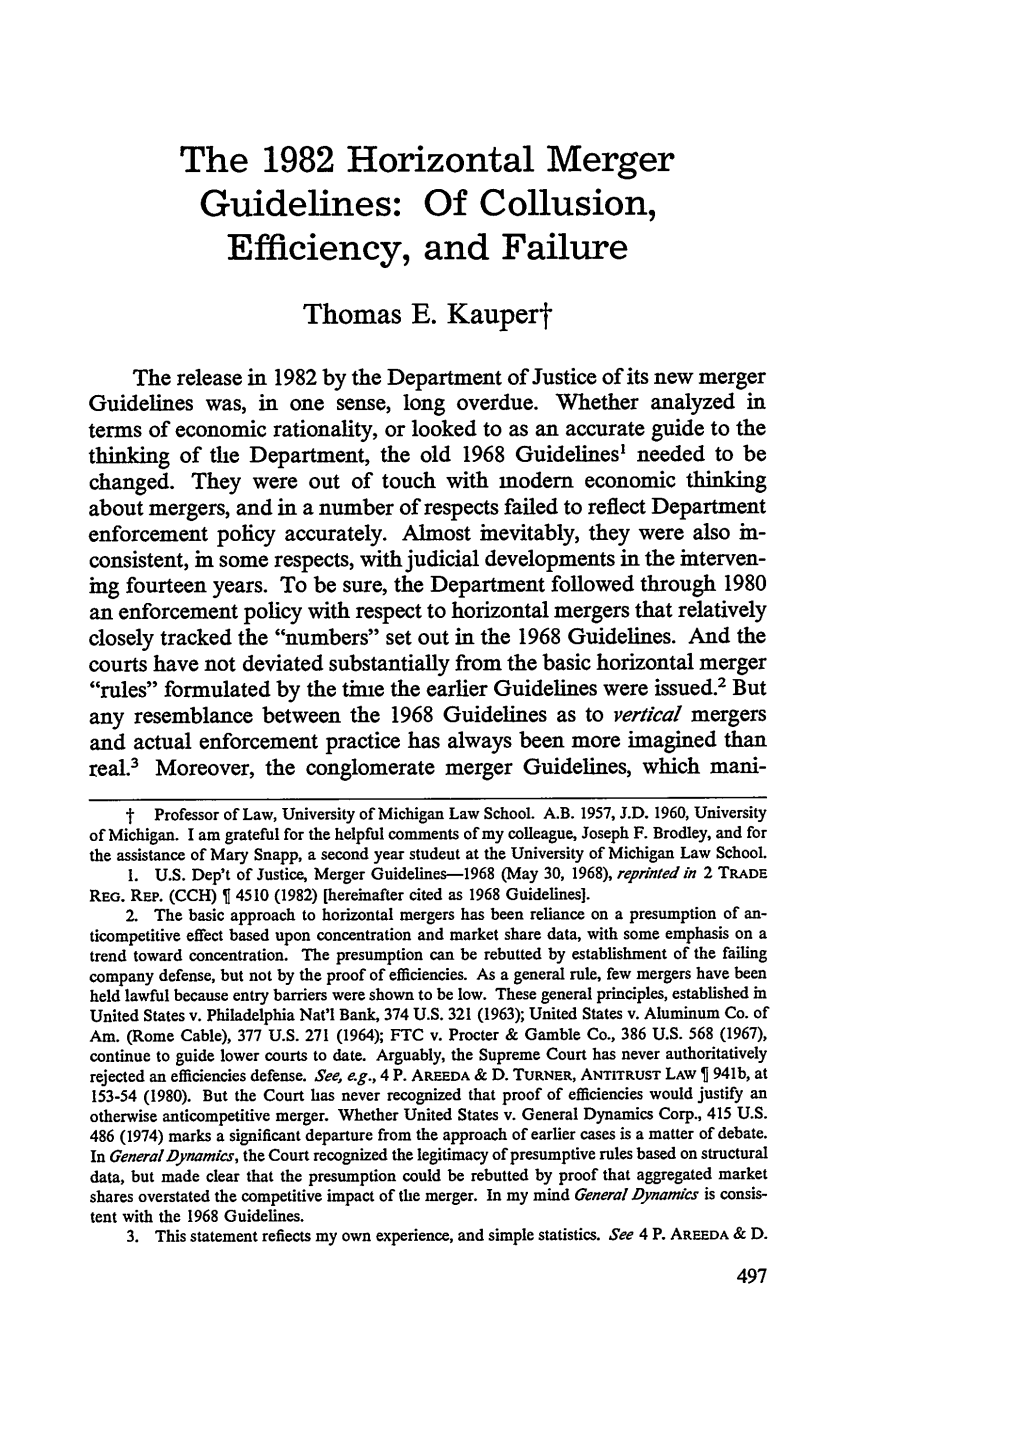 The 1982 Horizontal Merger Guidelines: of Collusion, Efficiency, and Failure